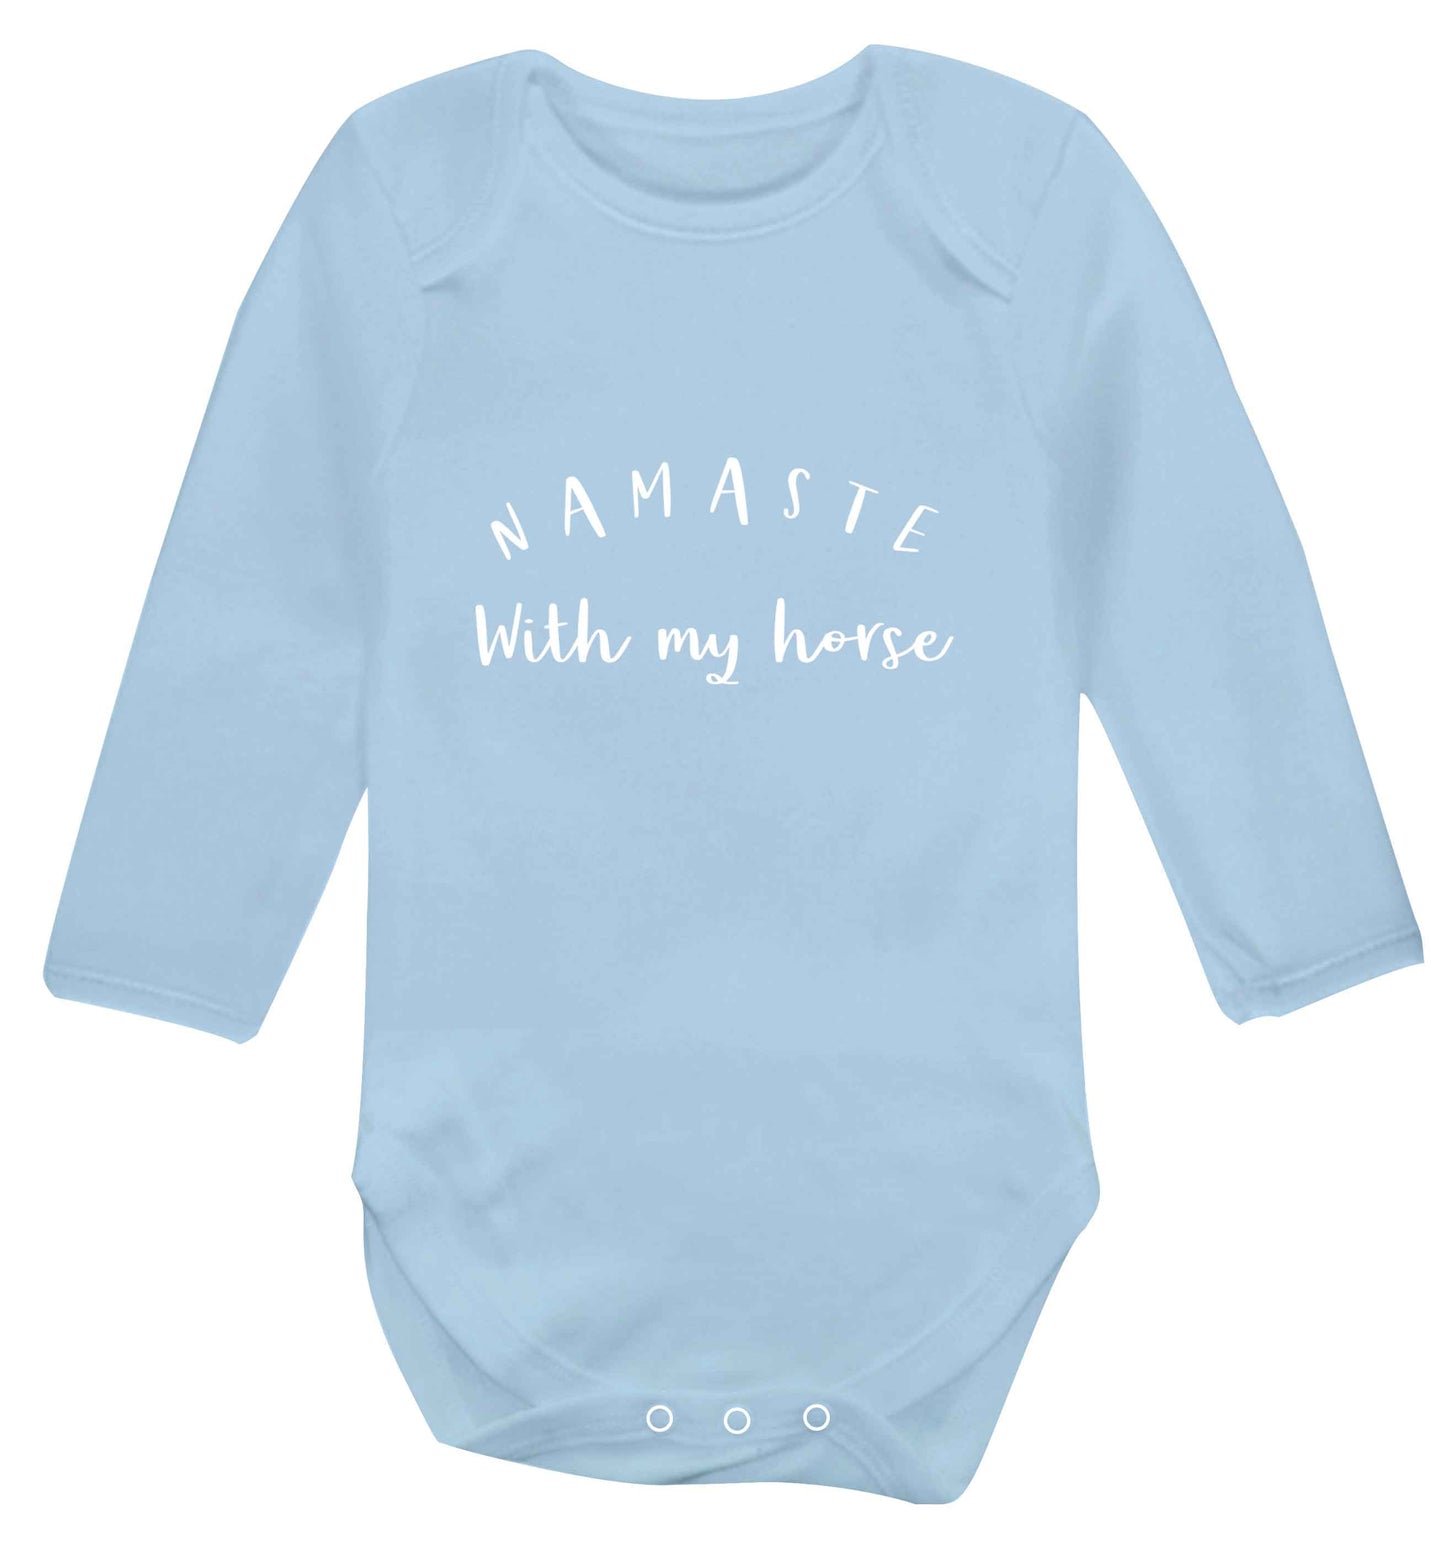 Namaste with my horse baby vest long sleeved pale blue 6-12 months